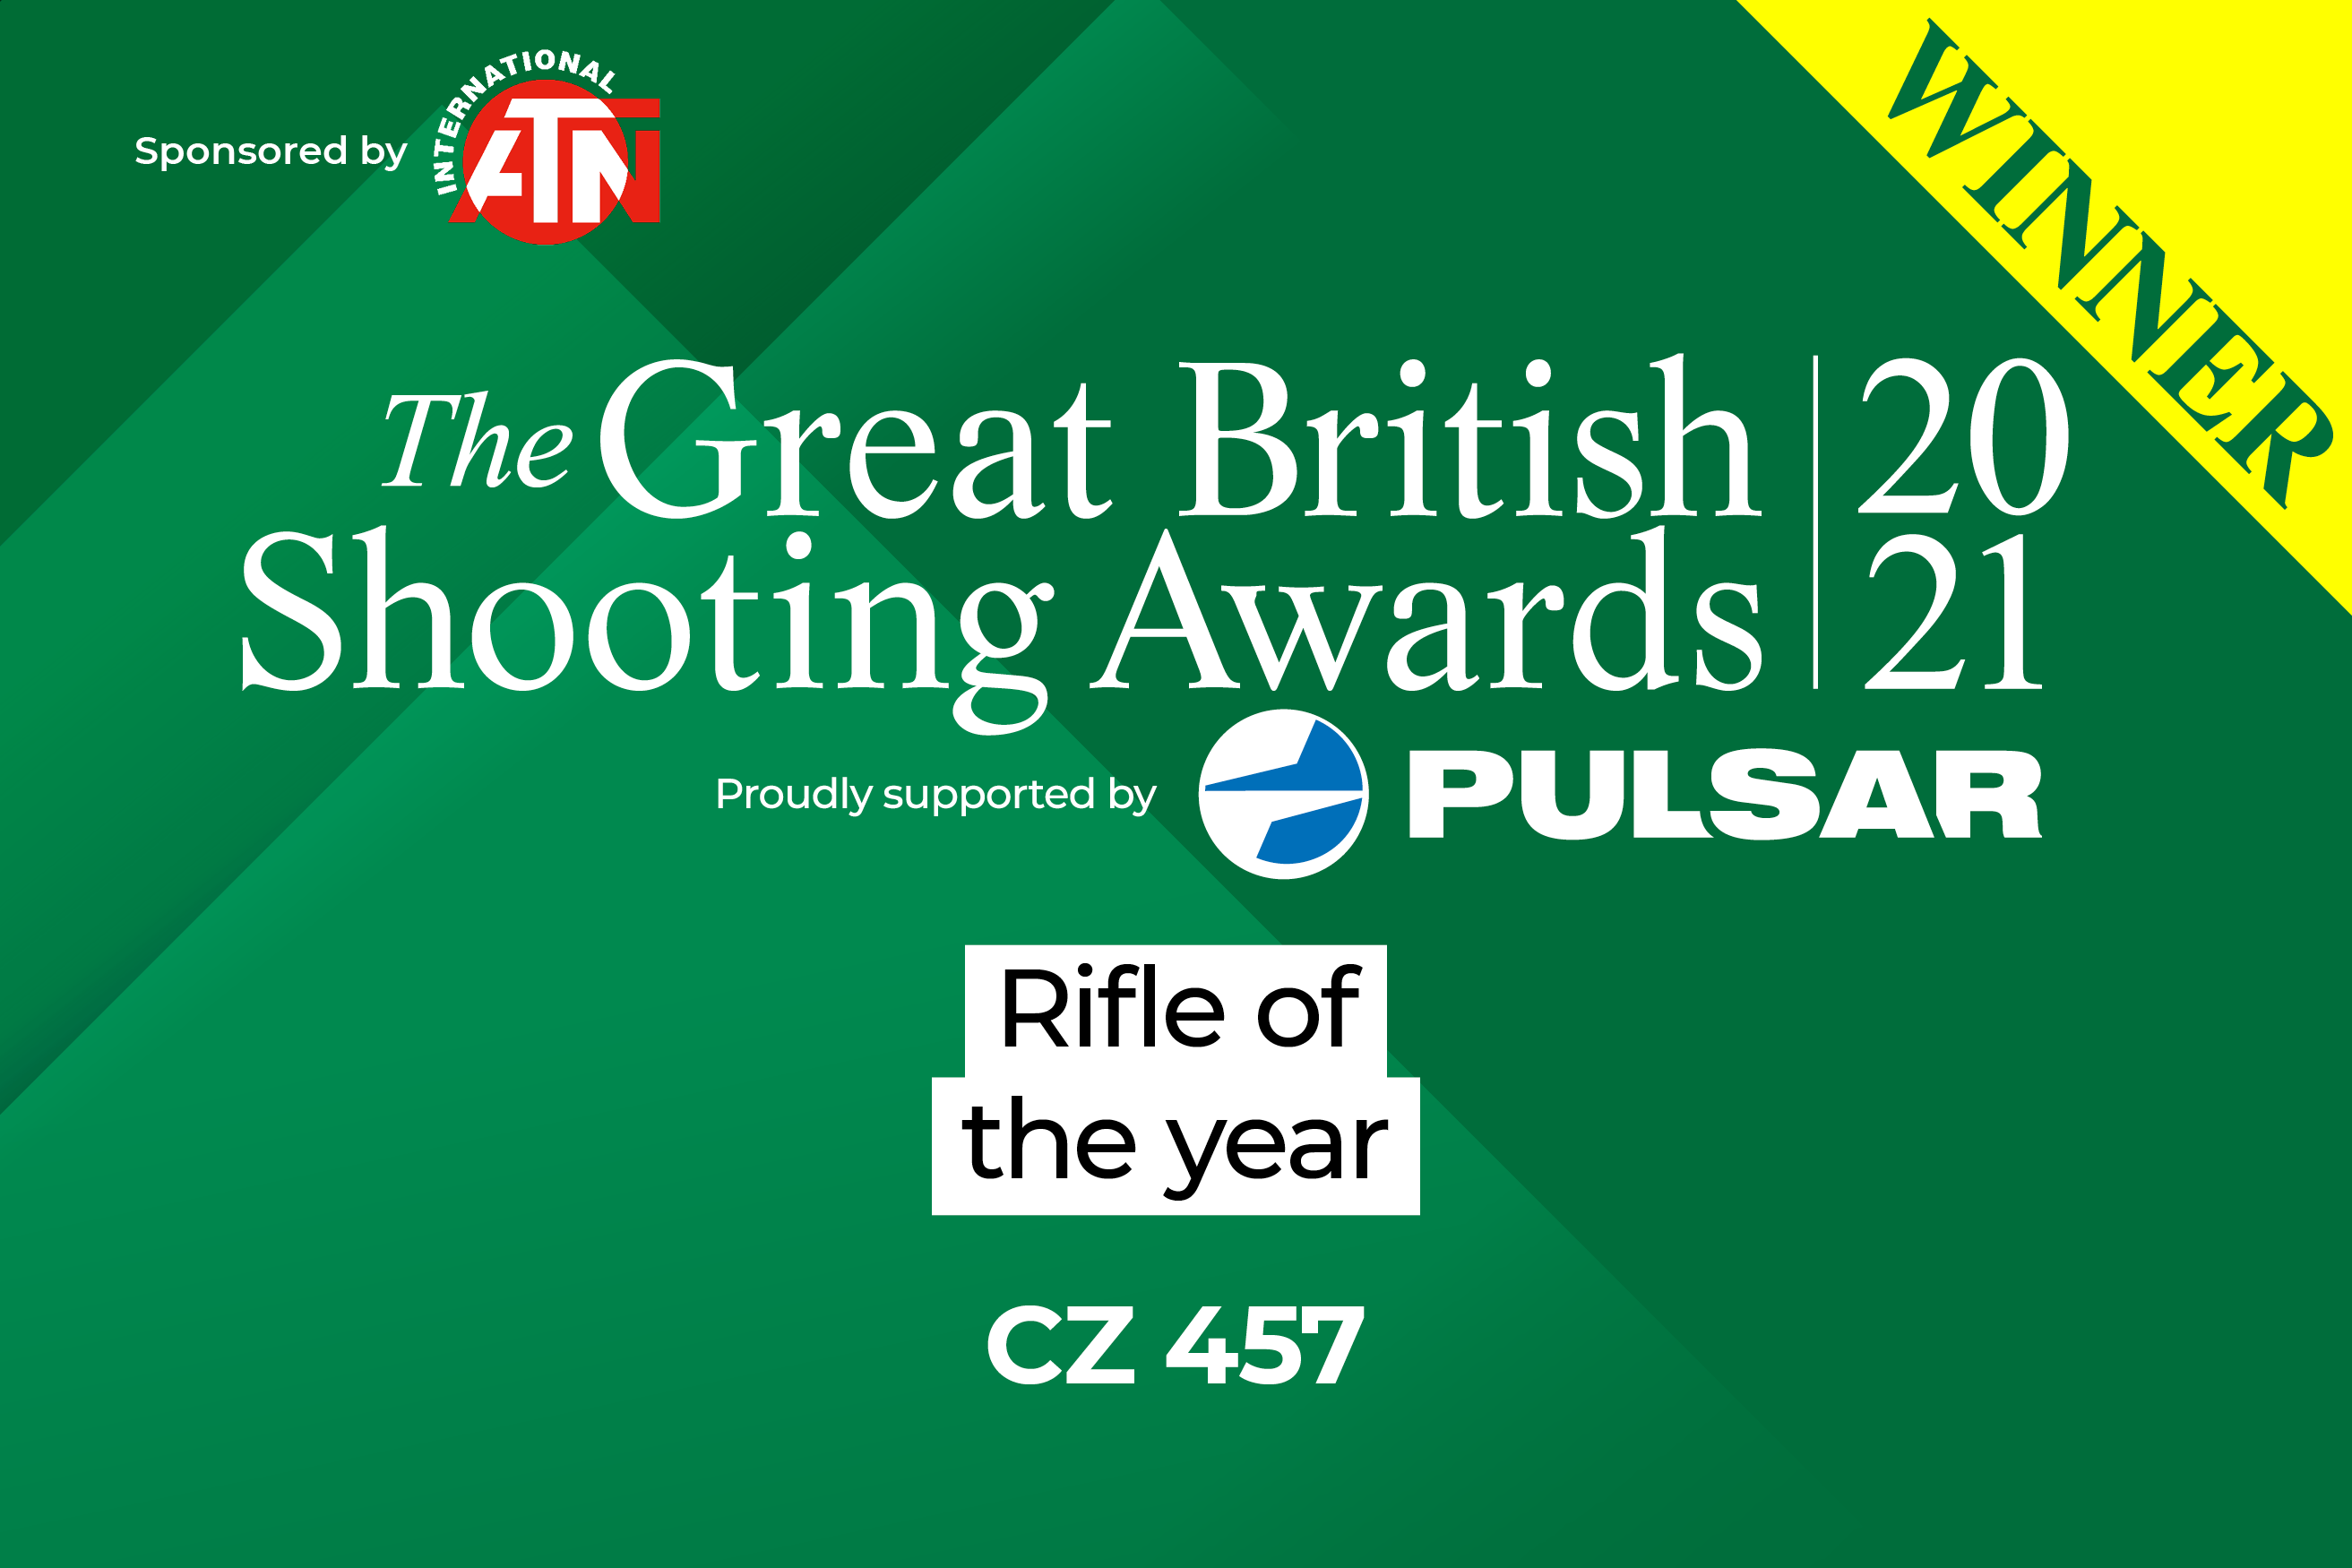 Rifle of the year